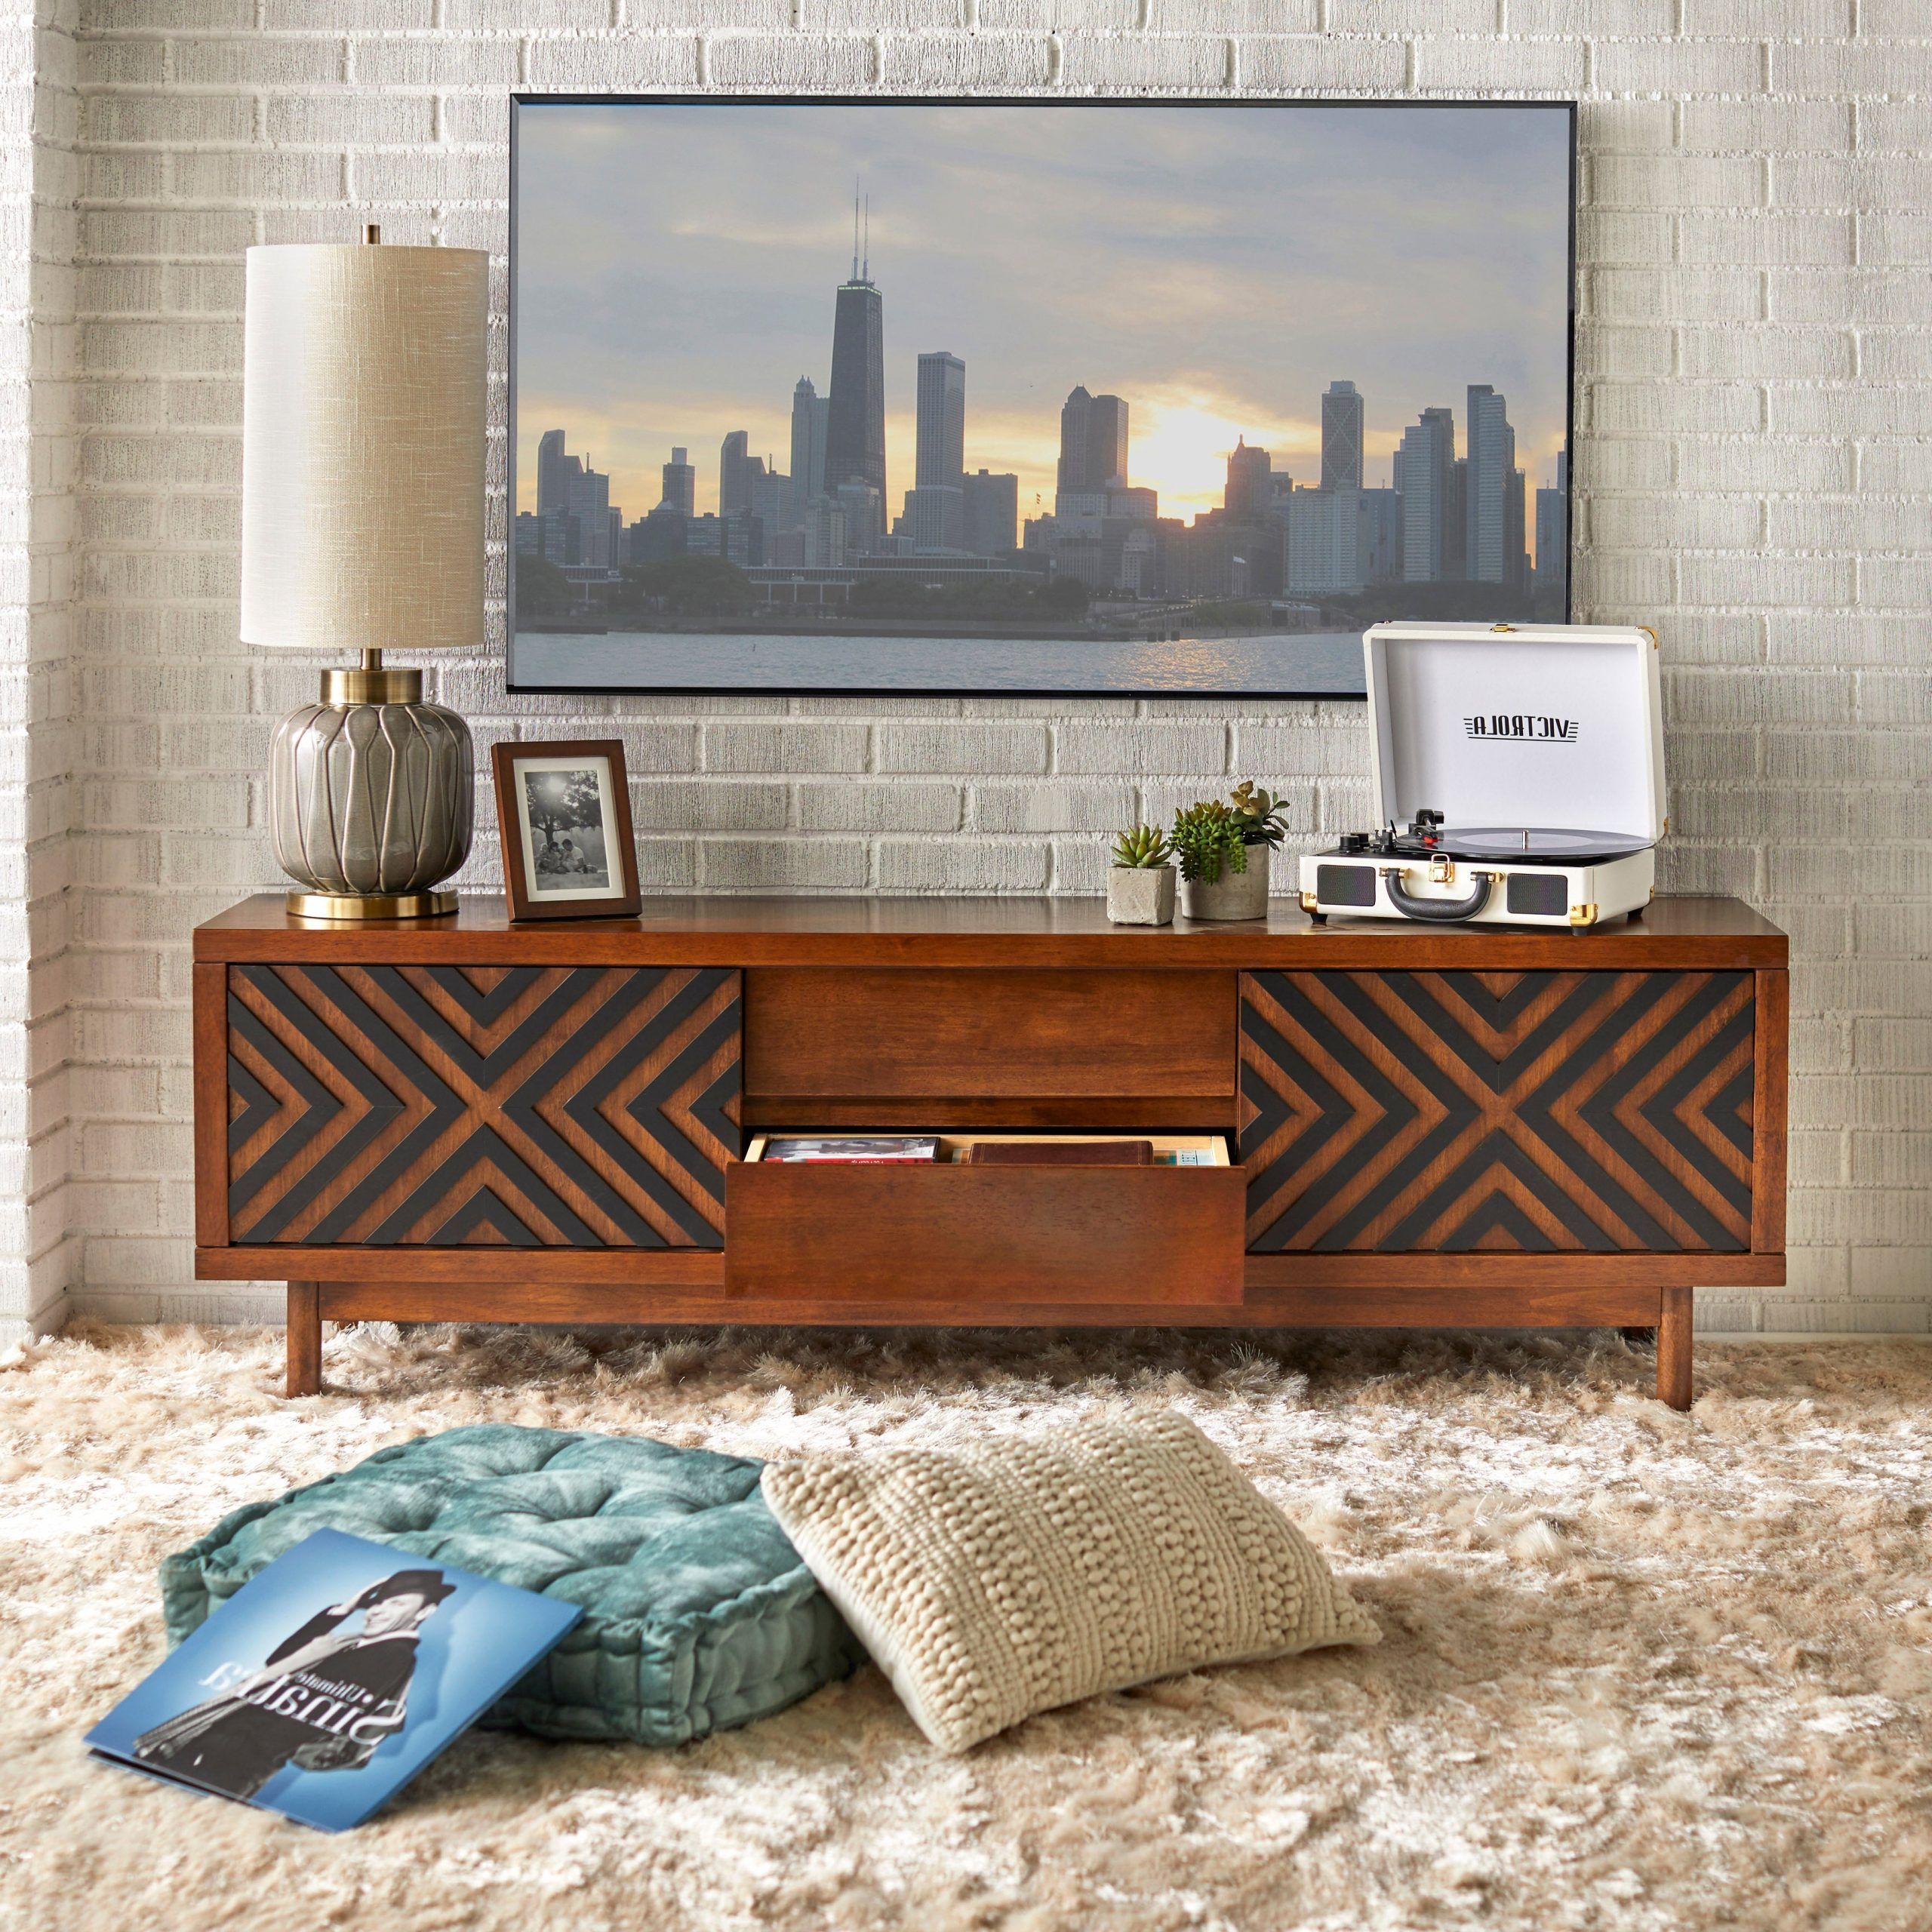 Popular Lifestorey Mason Mid Century Geometric Tv Stand – Overstock – 28639271 Intended For Modern Geometric Tv Stands (View 1 of 10)